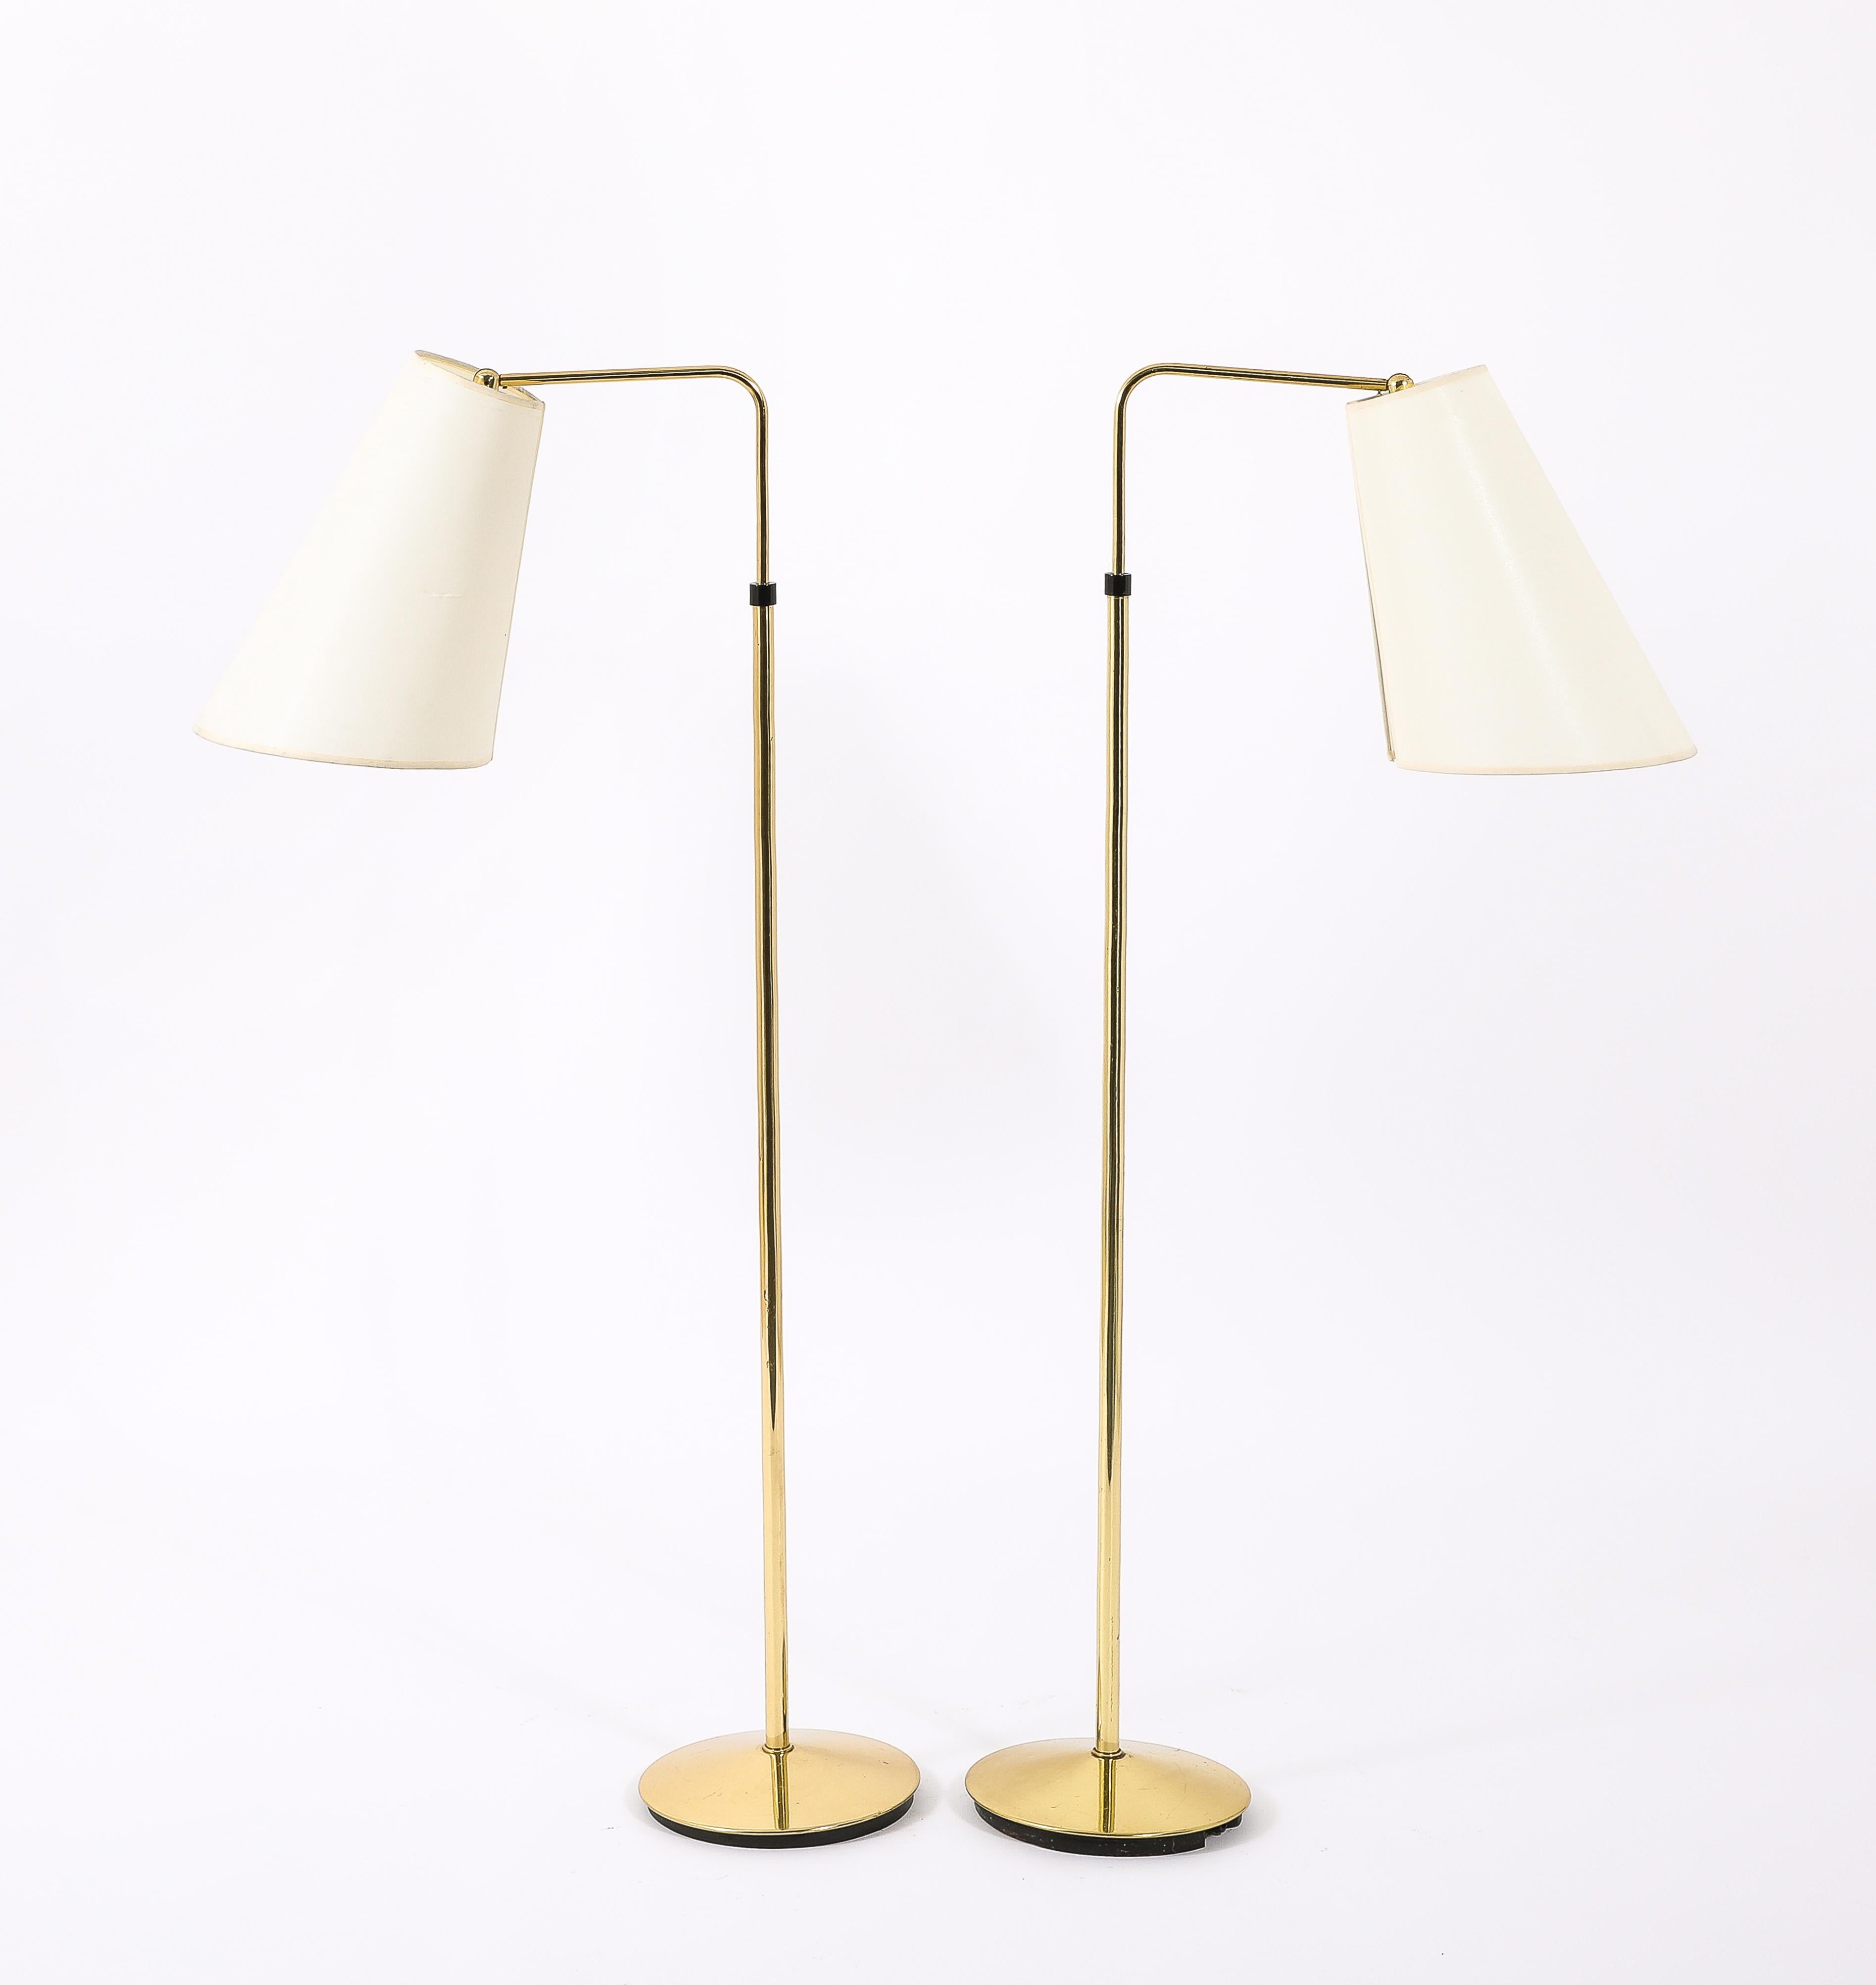 Brass reading floor lamps by Metalarte in brass, fully adjustable in height from 50” to 70”. Shades included
